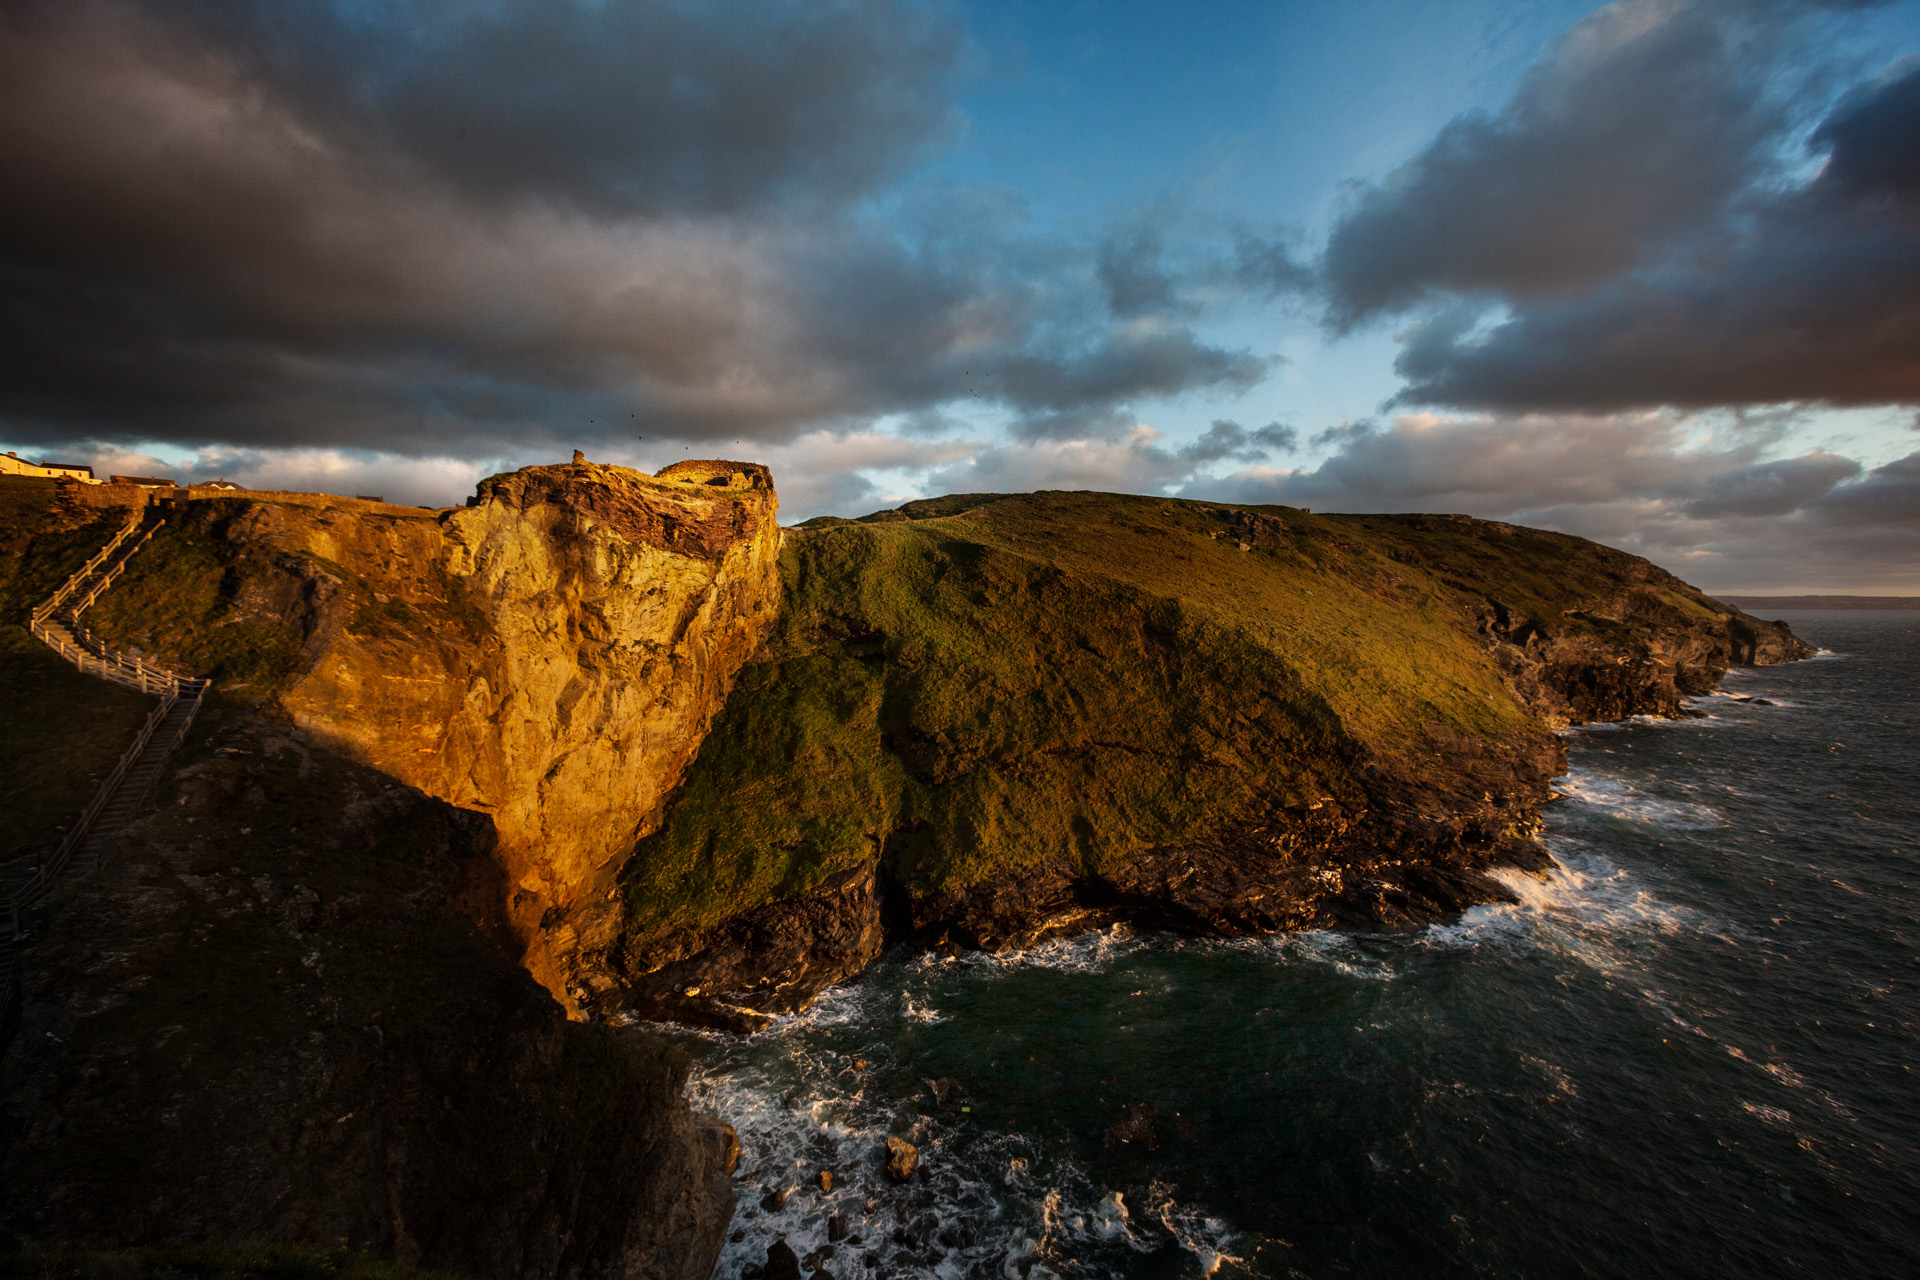  Legend says King Arthur was conceived in Tintagel castle high above the Atlantic Ocean in Cornwall, the illegitimate son of Uther Pendragon and his mistress Igerne. Archaeologists found evidence of trade in the medieval castle dating back to the 5th